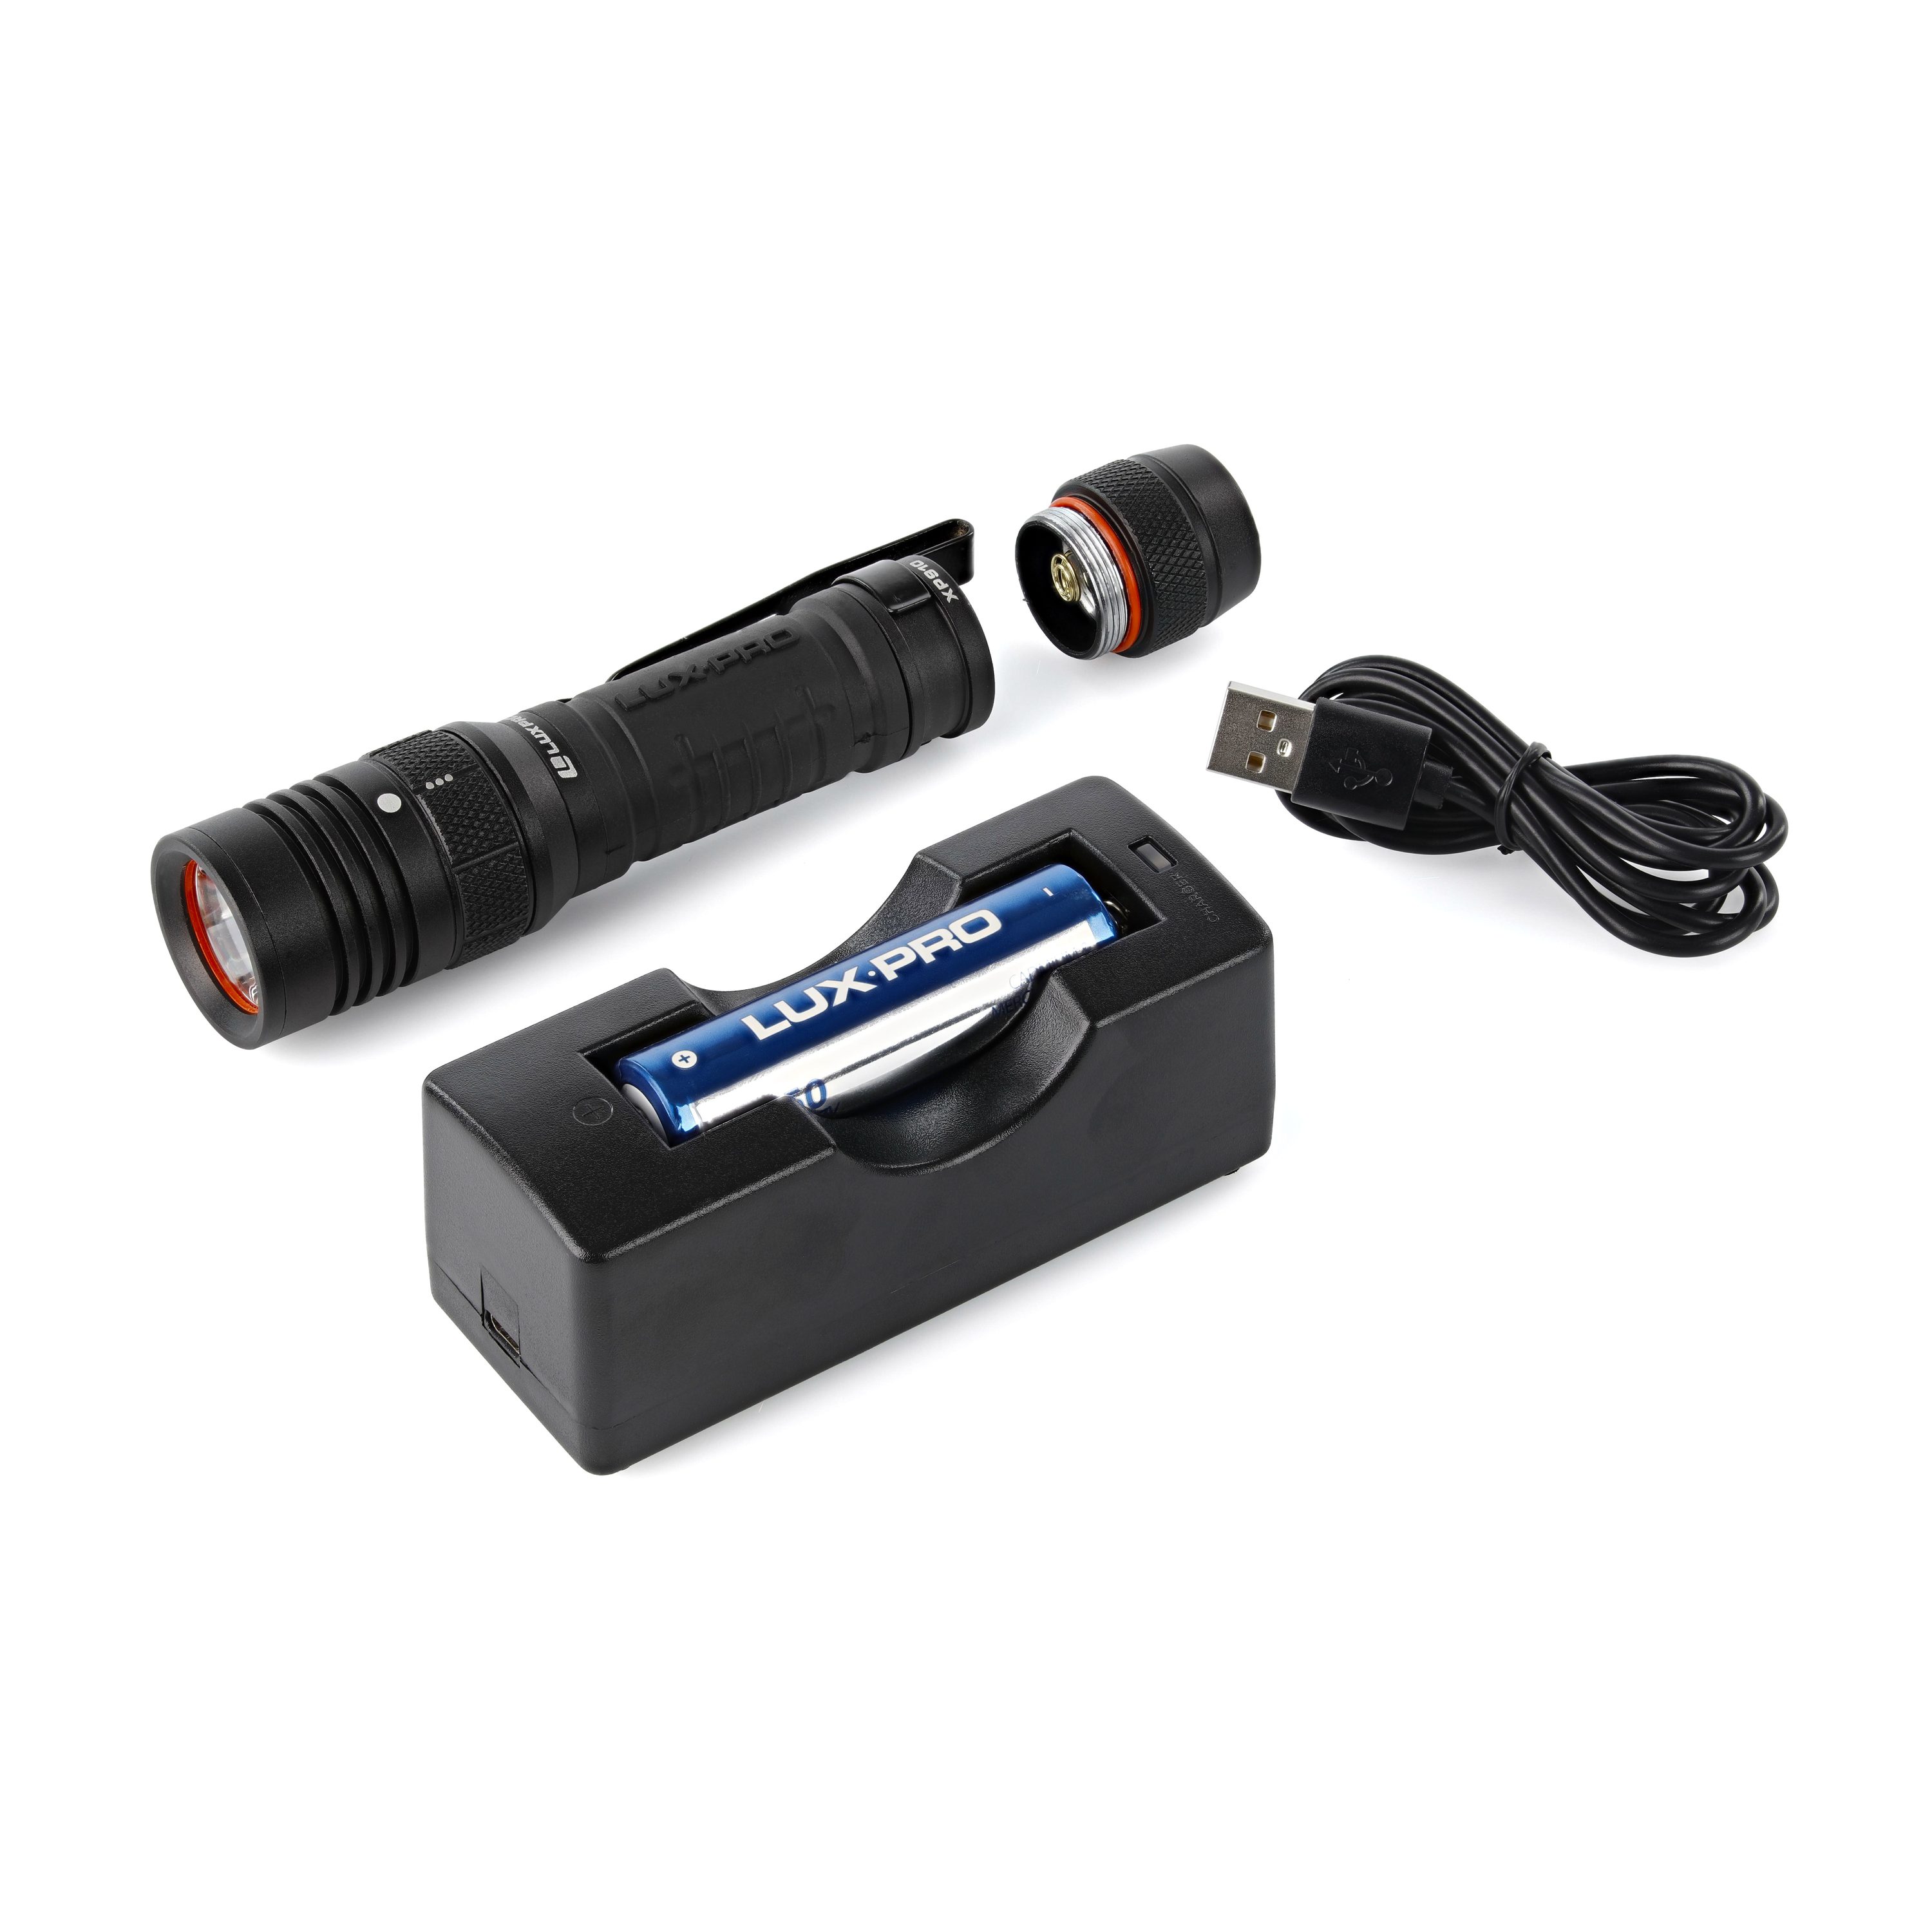 Lux-Pro 4 LED Spotlight Flashlight Ion (3.7V) Battery Included) at Lowes.com